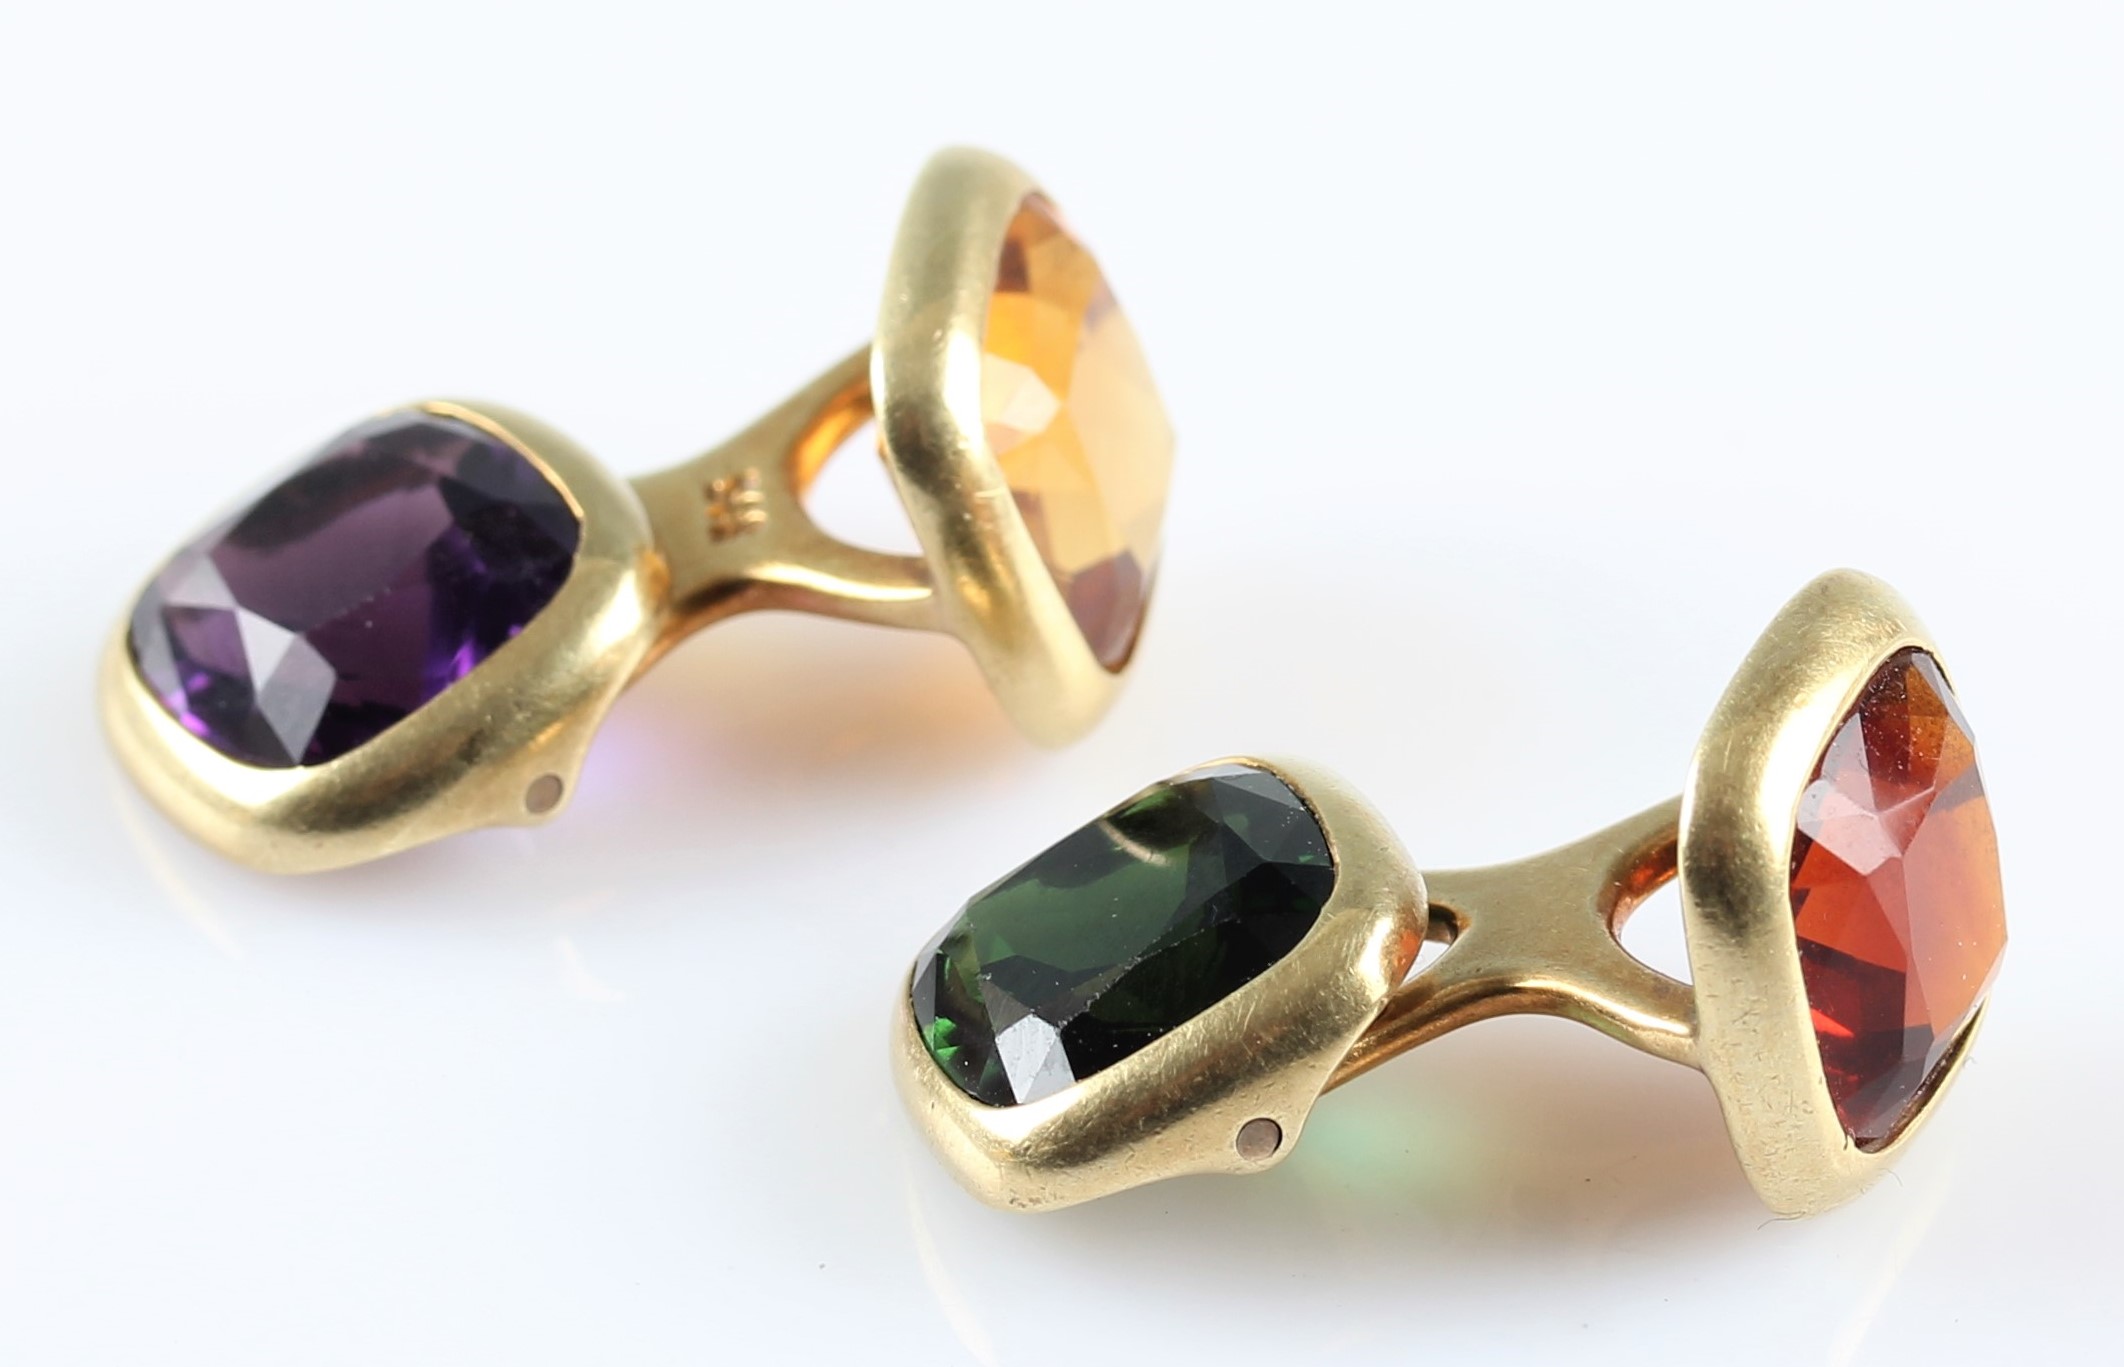 A pair of gemstone set cufflinks, set with cushion cut pieces of amethyst, citrine, tourmaline and a